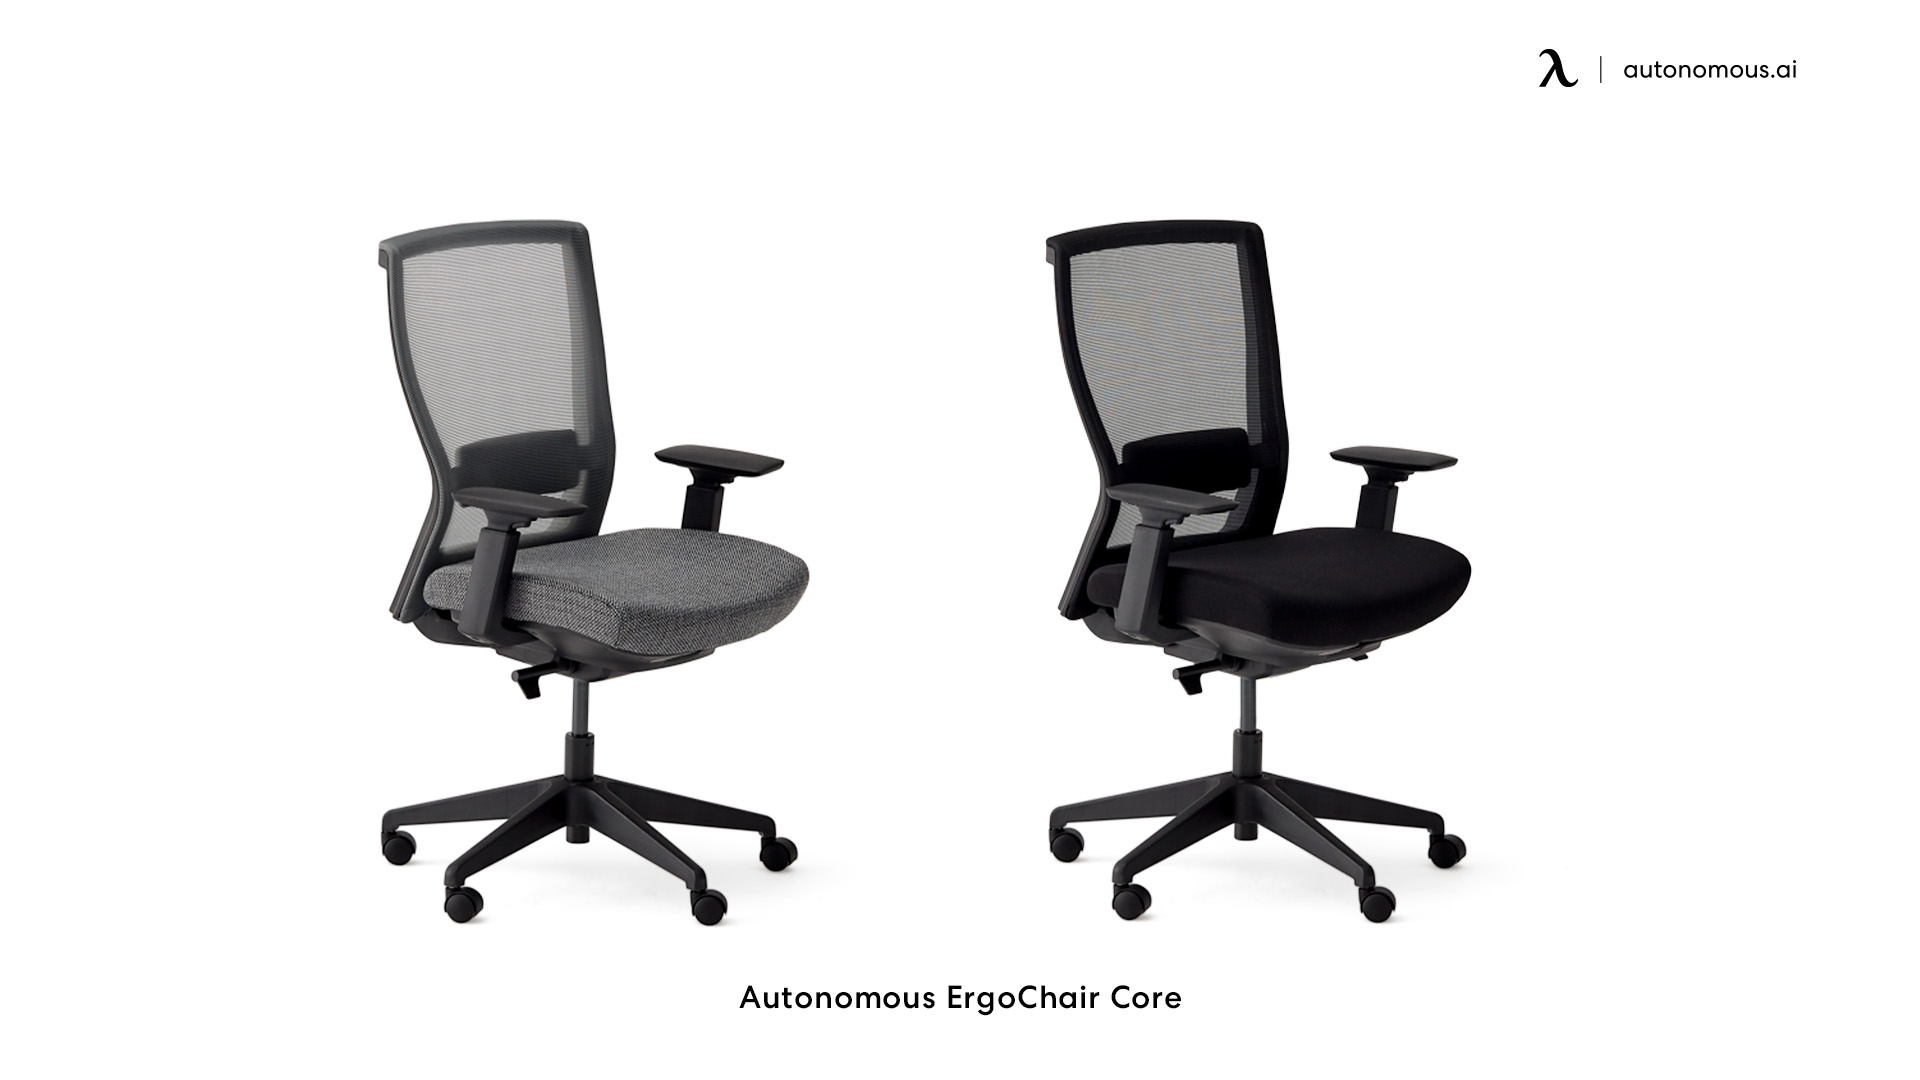 ErgoChair Core is a computer ergonomic chair that people need to cover their various needs.